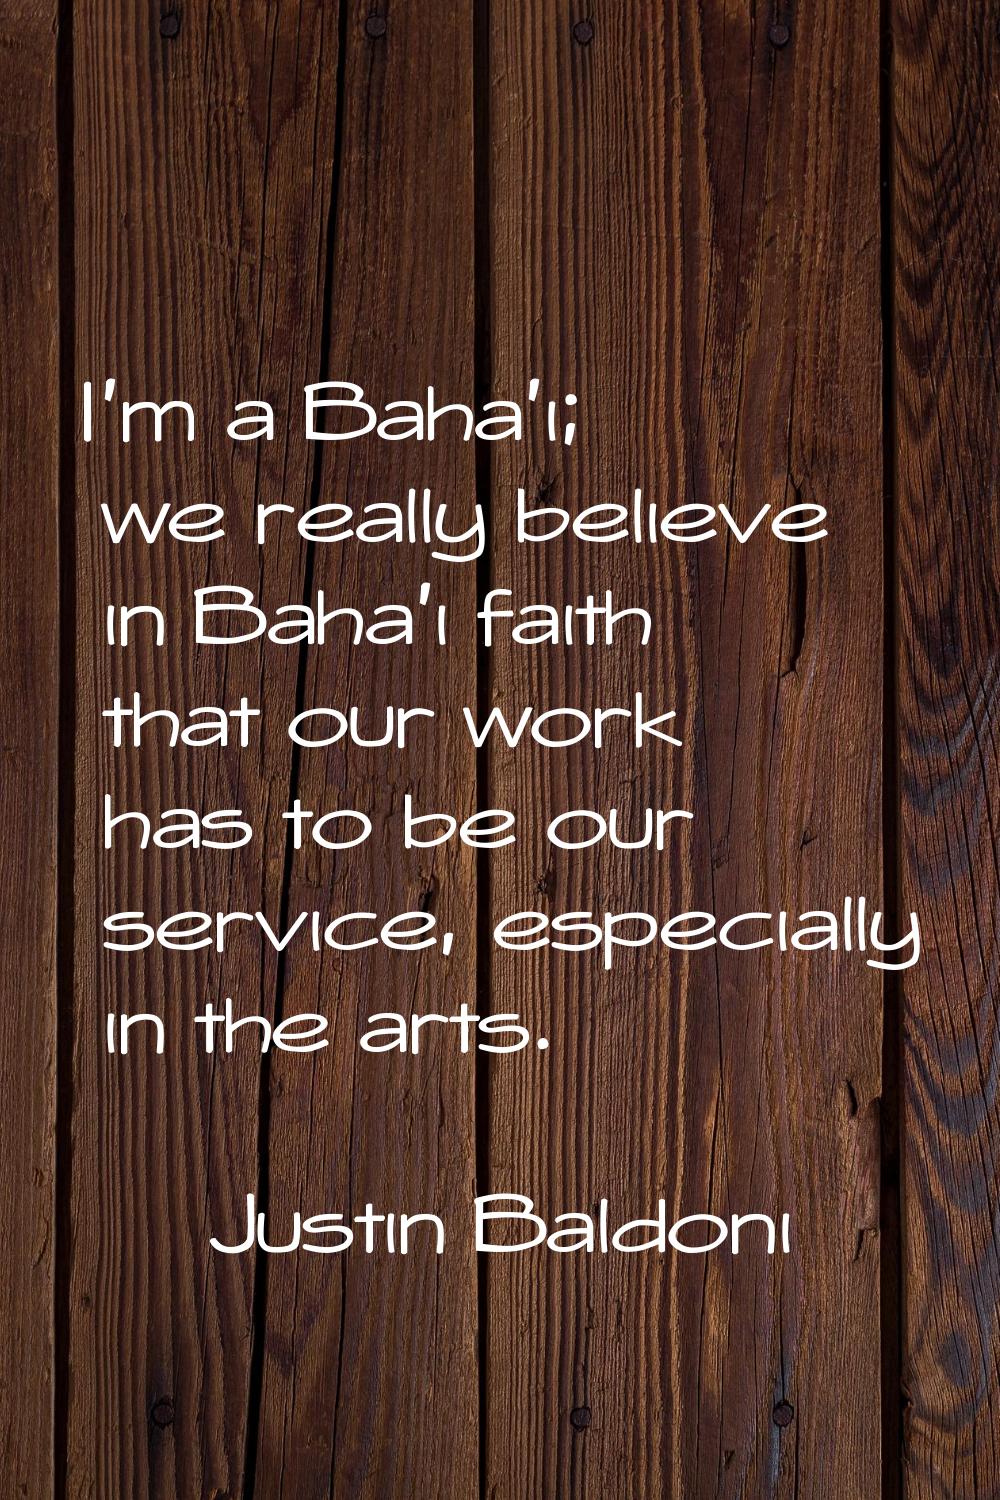 I'm a Baha'i; we really believe in Baha'i faith that our work has to be our service, especially in 